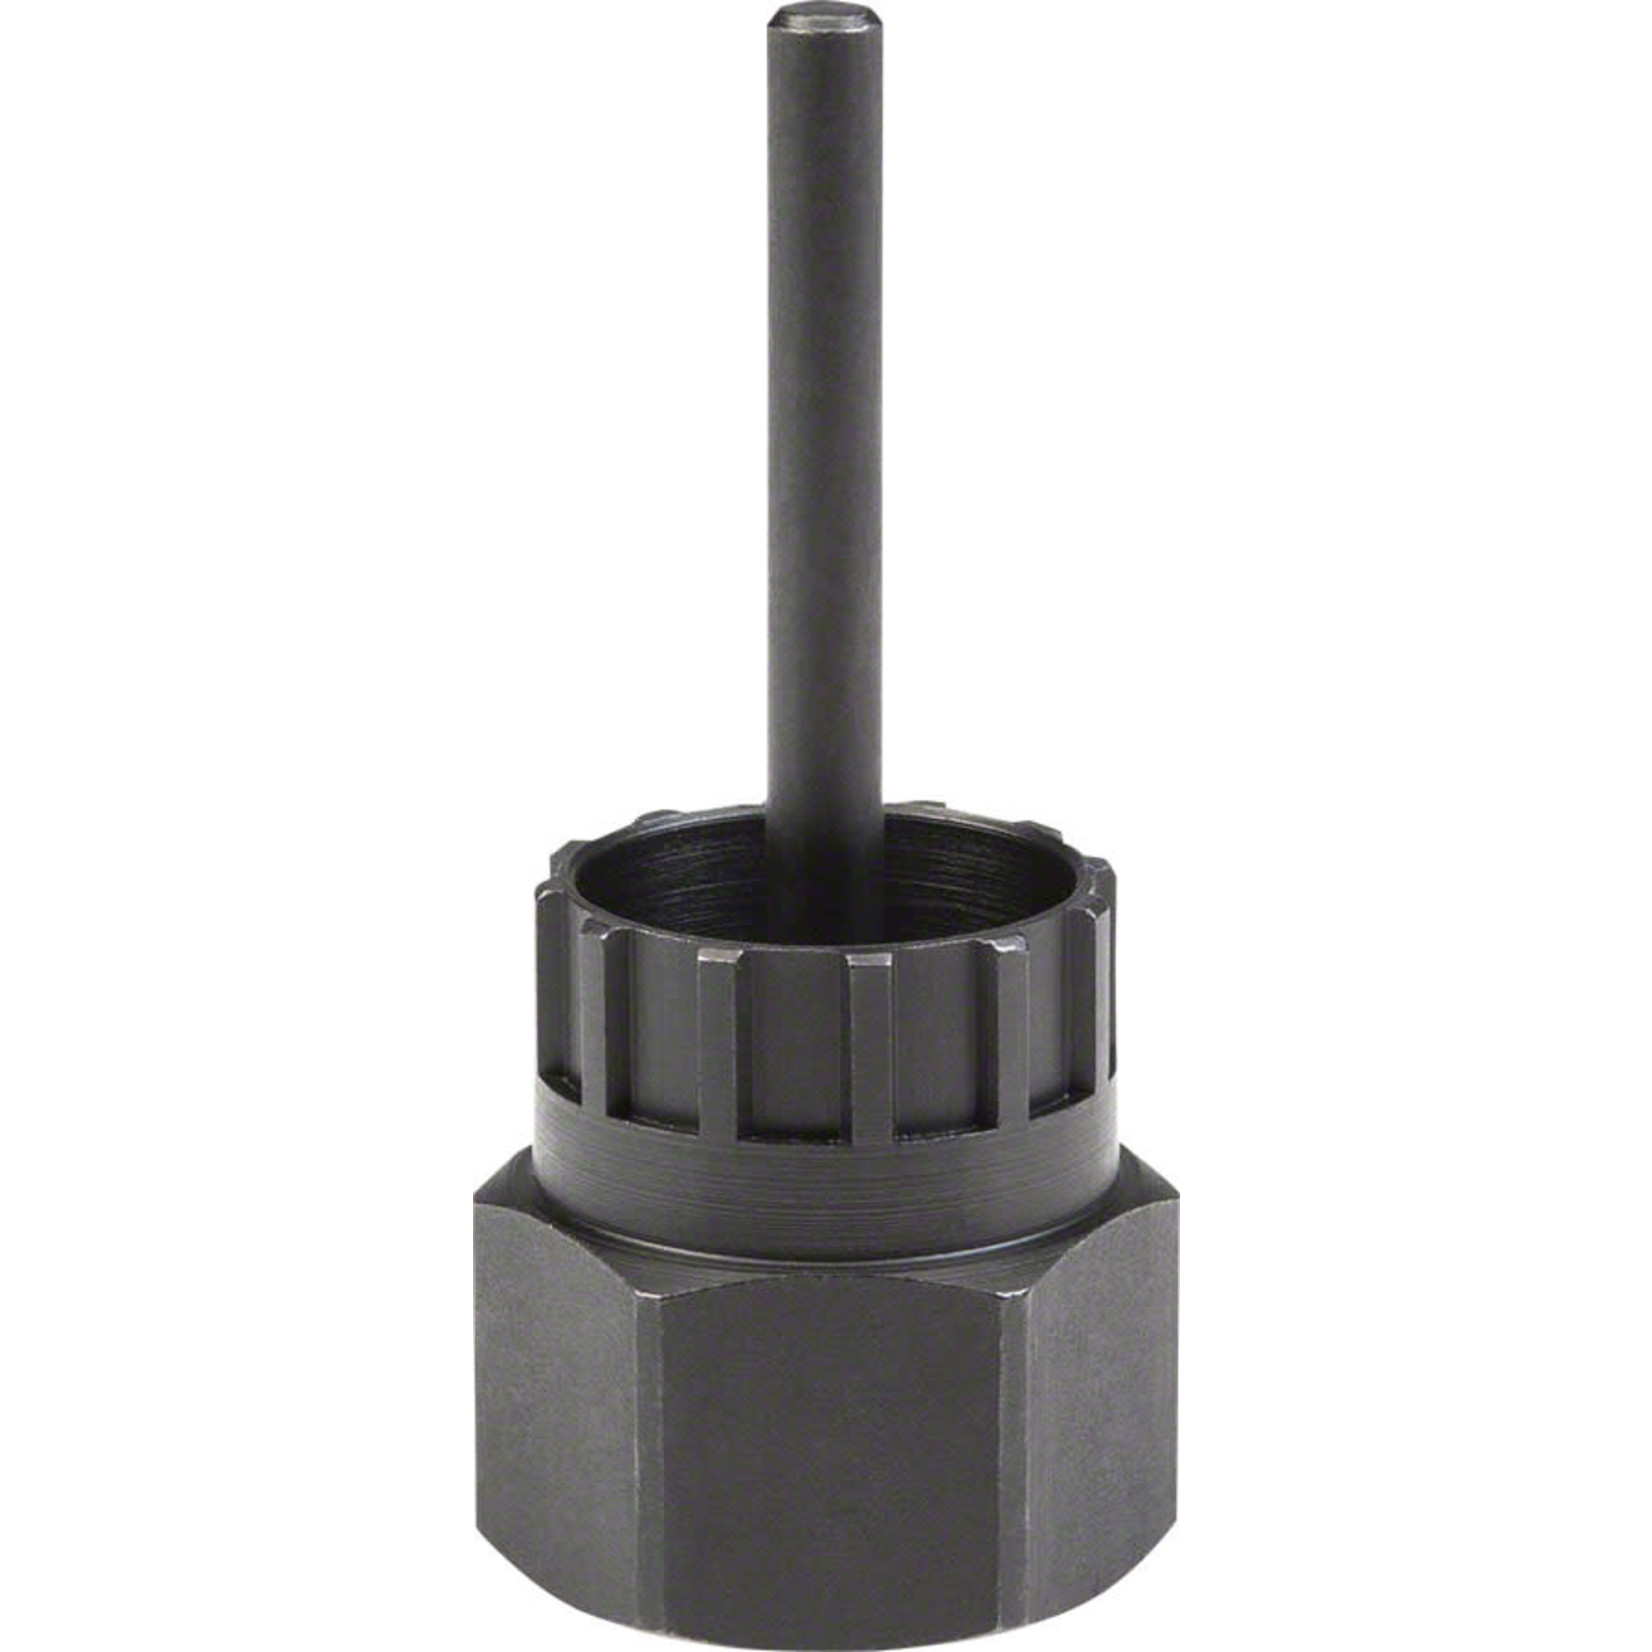 Park Tool Park Tool FR-5.2G Cassette Lockring Tool with 5mm Guide Pin